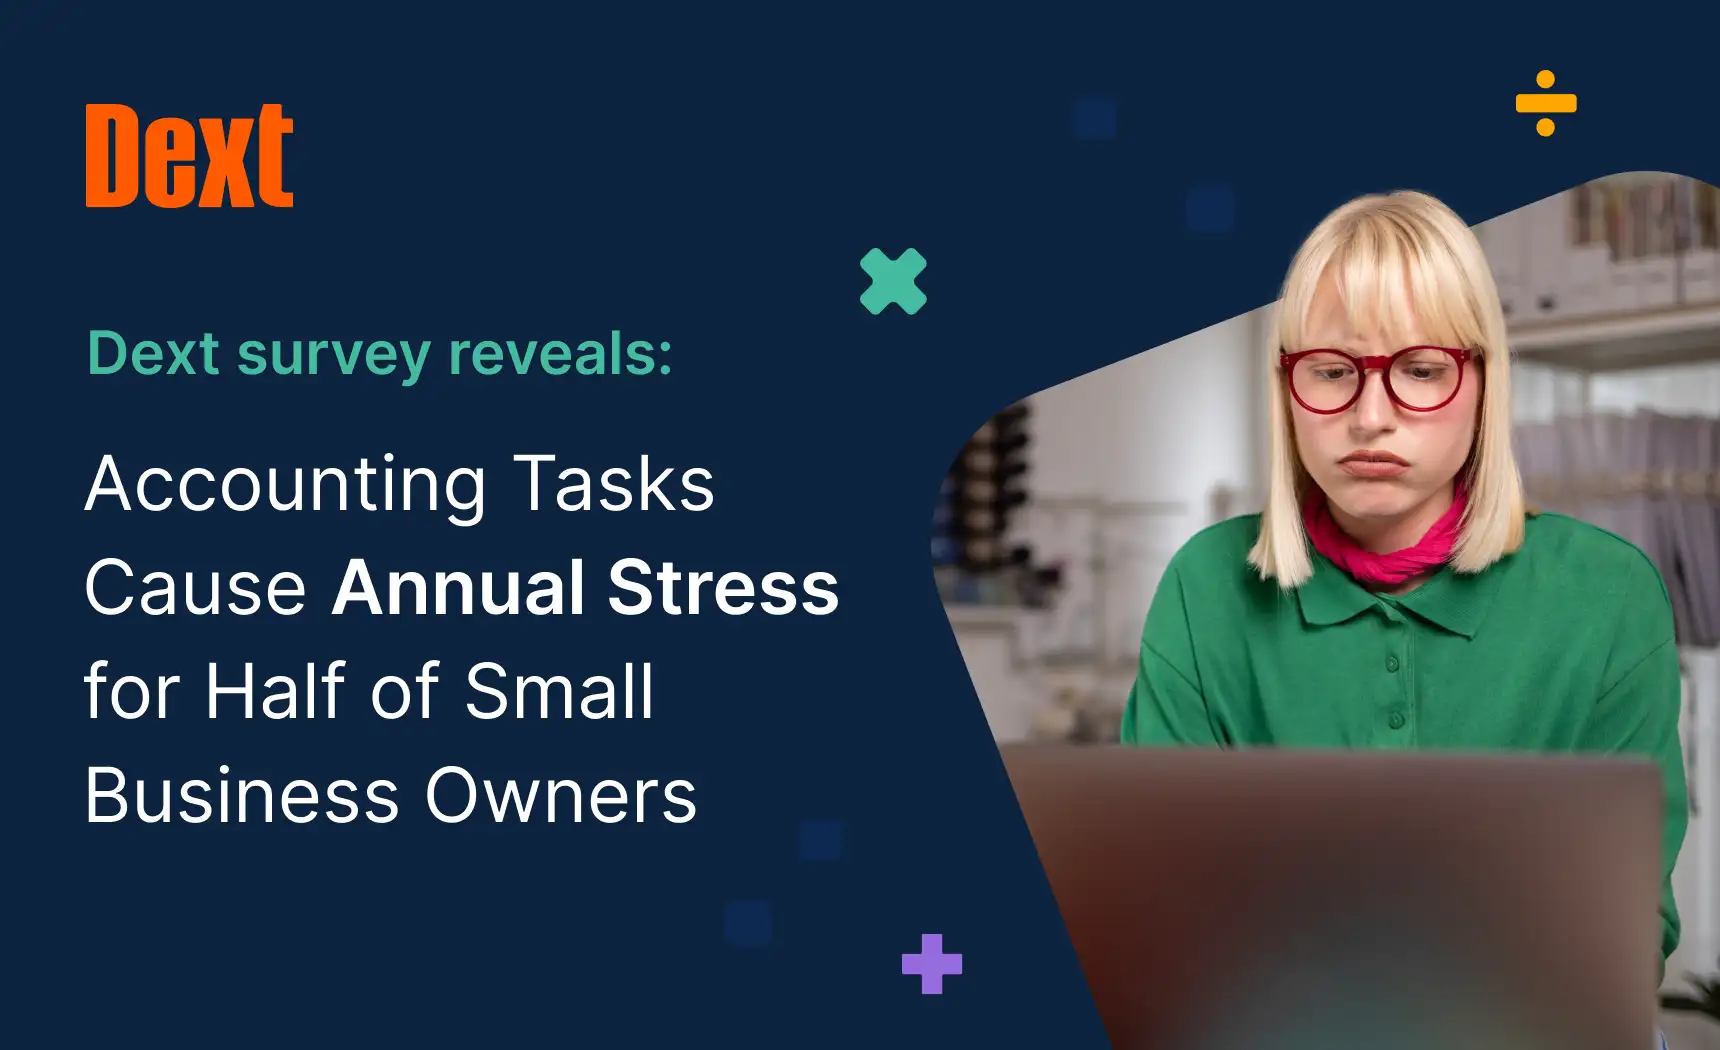 Accounting Tasks Cause Annual Stress for Half of Small Business Owners by Dext image